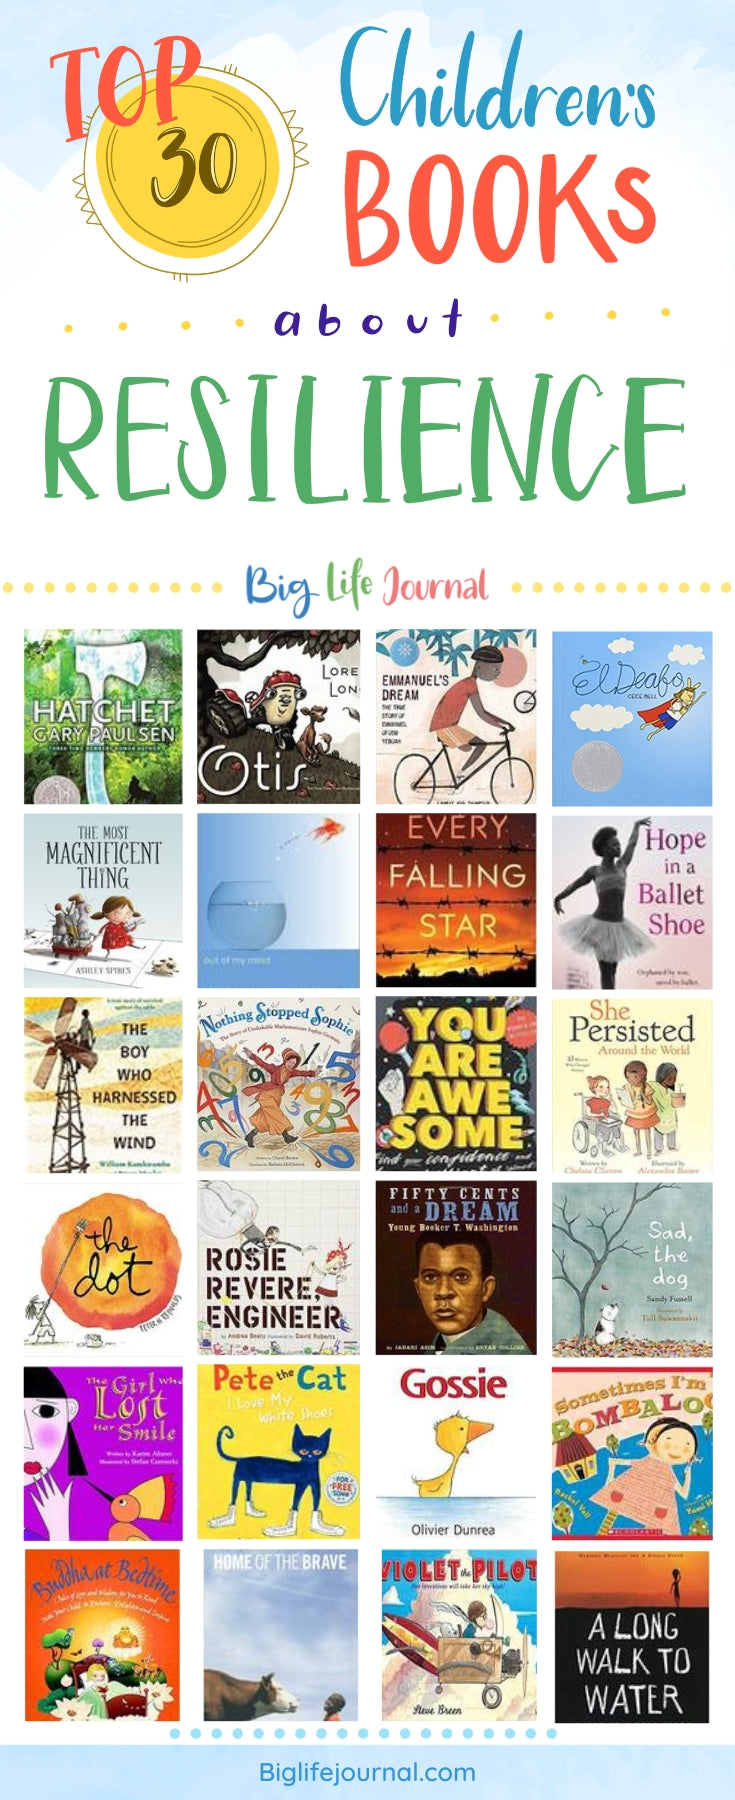 Top 30 Children’s Books About Resilience 